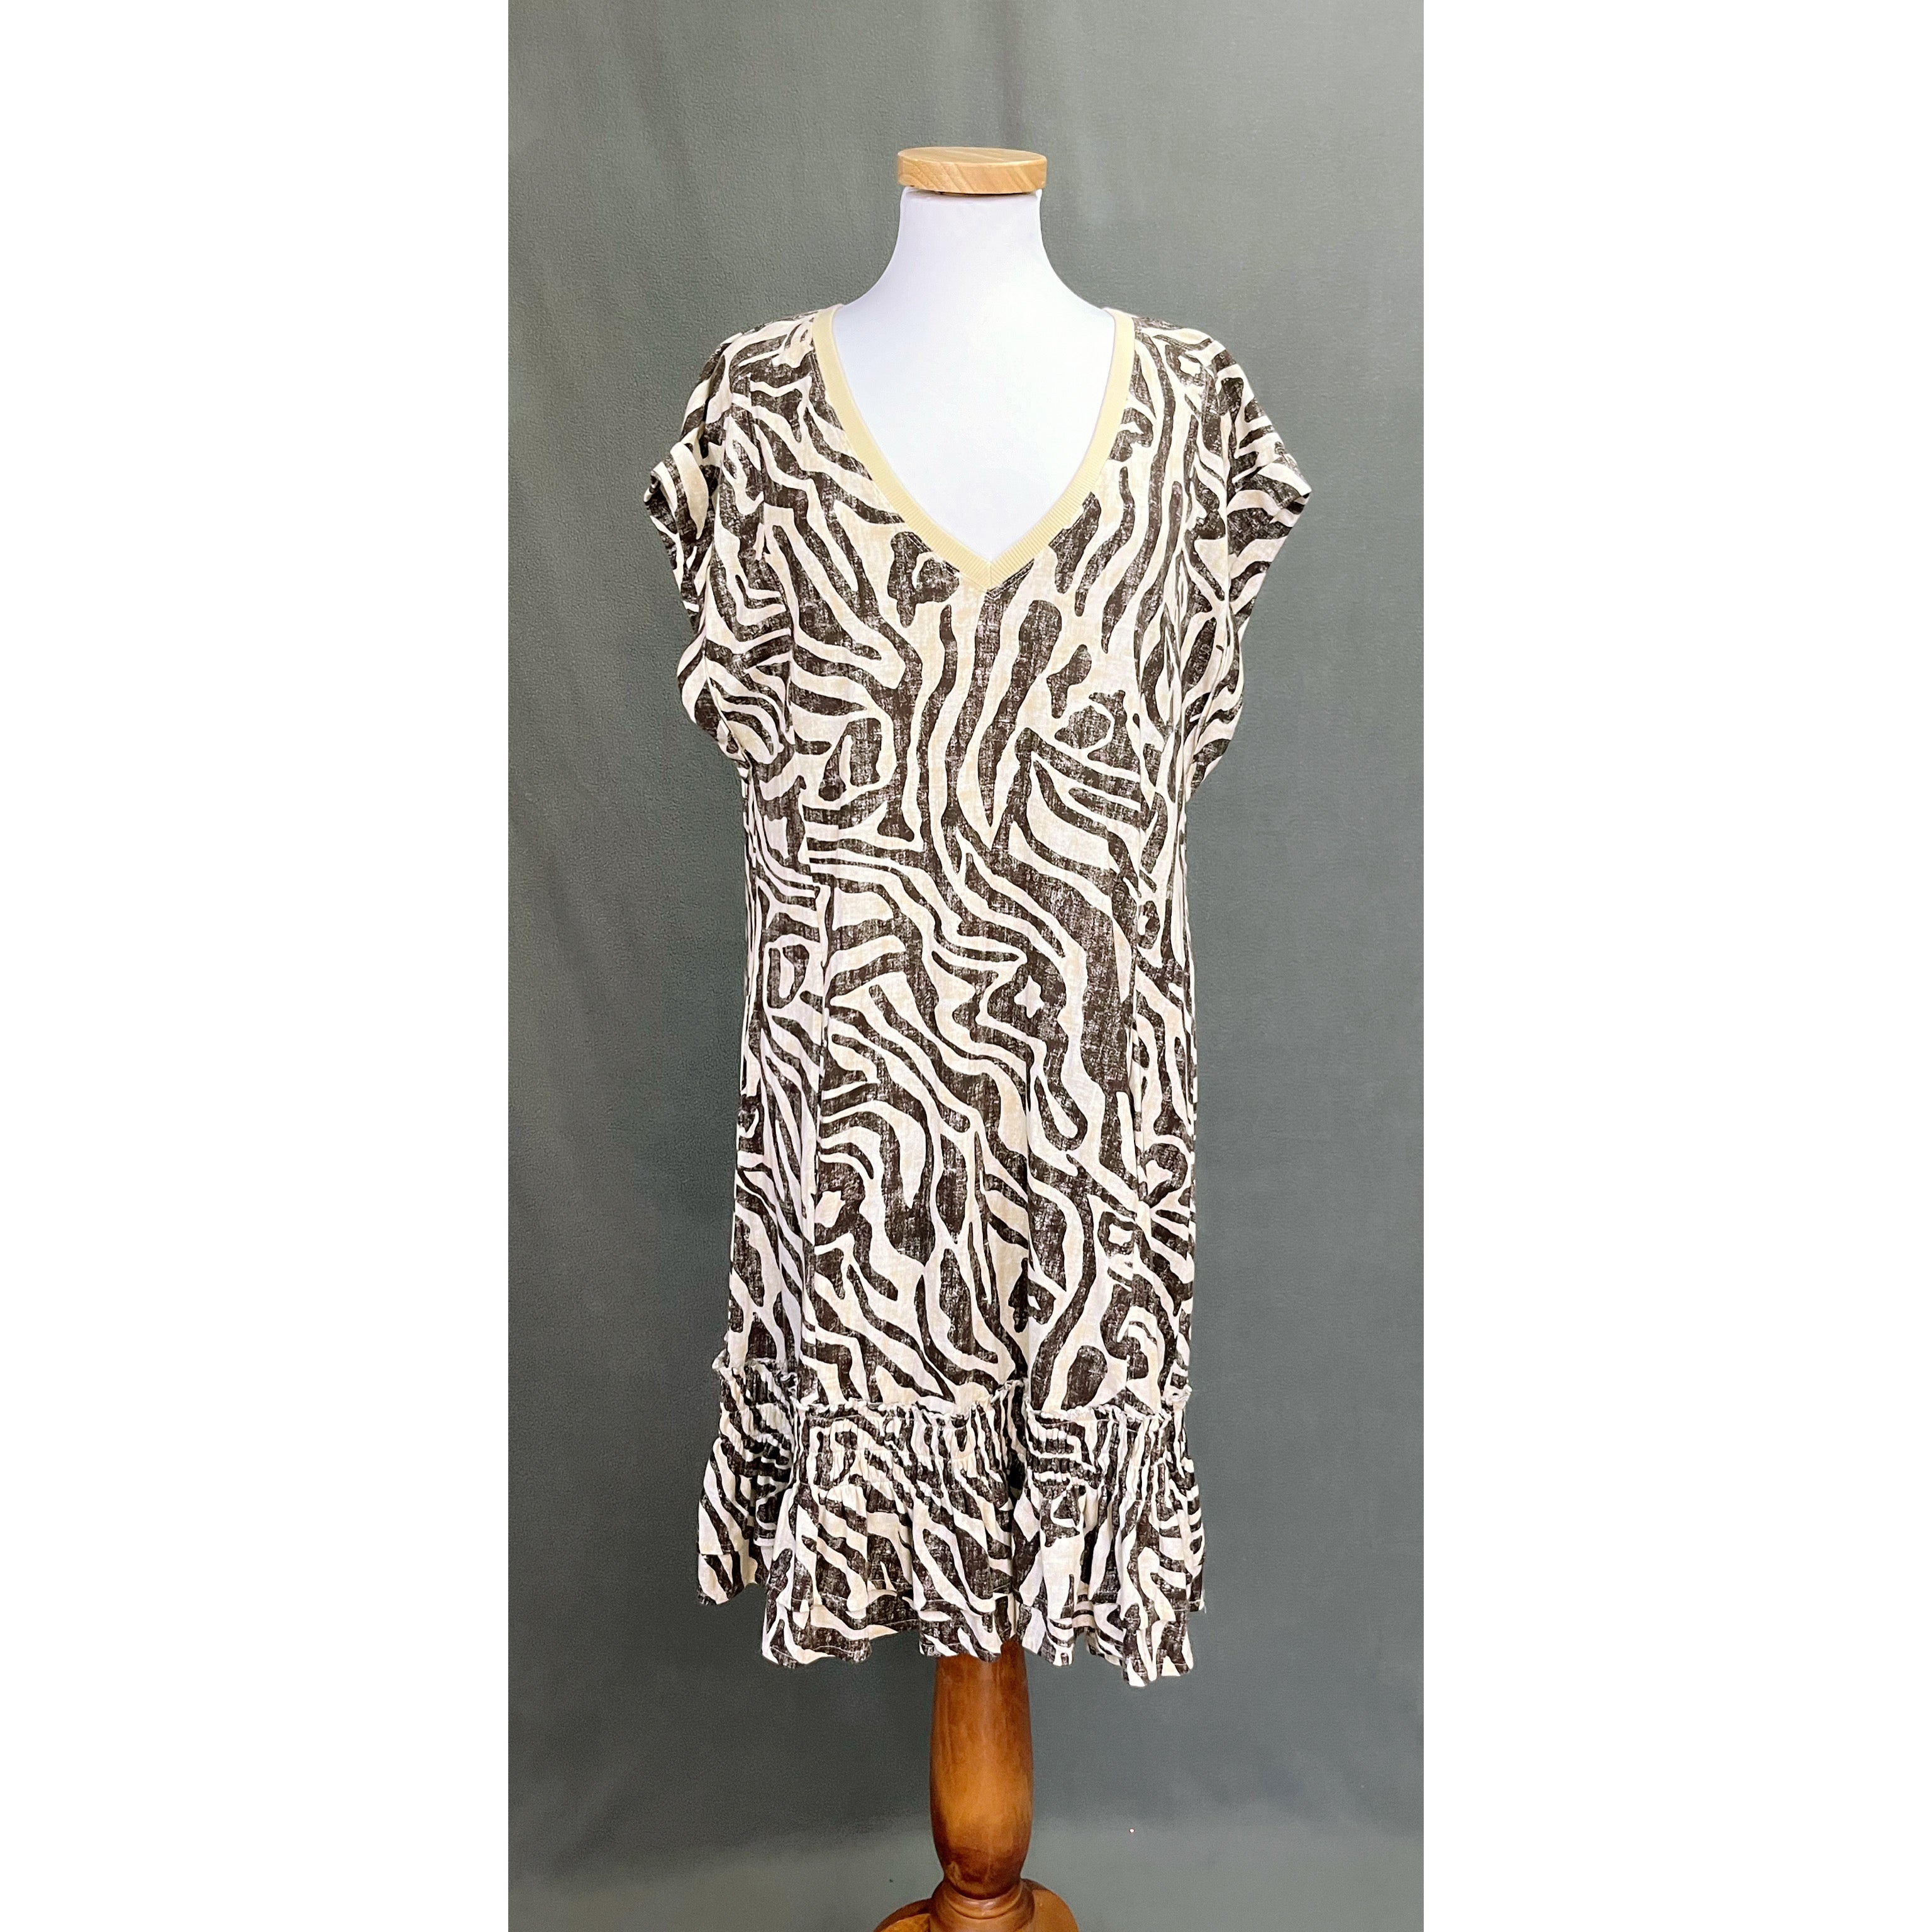 Daily Practice brown print dress, size M, NEW WITH TAGS!